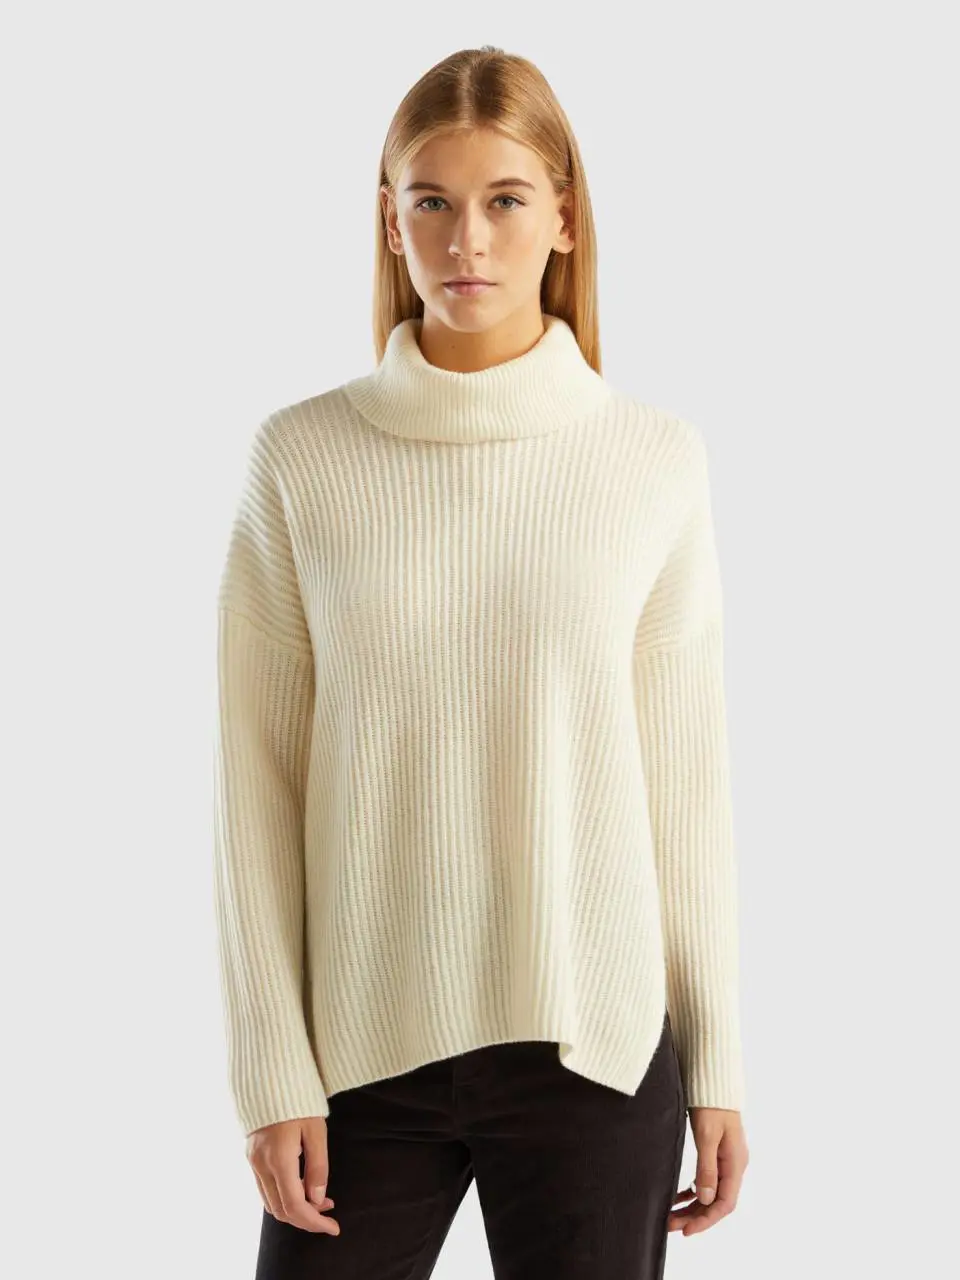 Benetton turtleneck with wide collar. 1